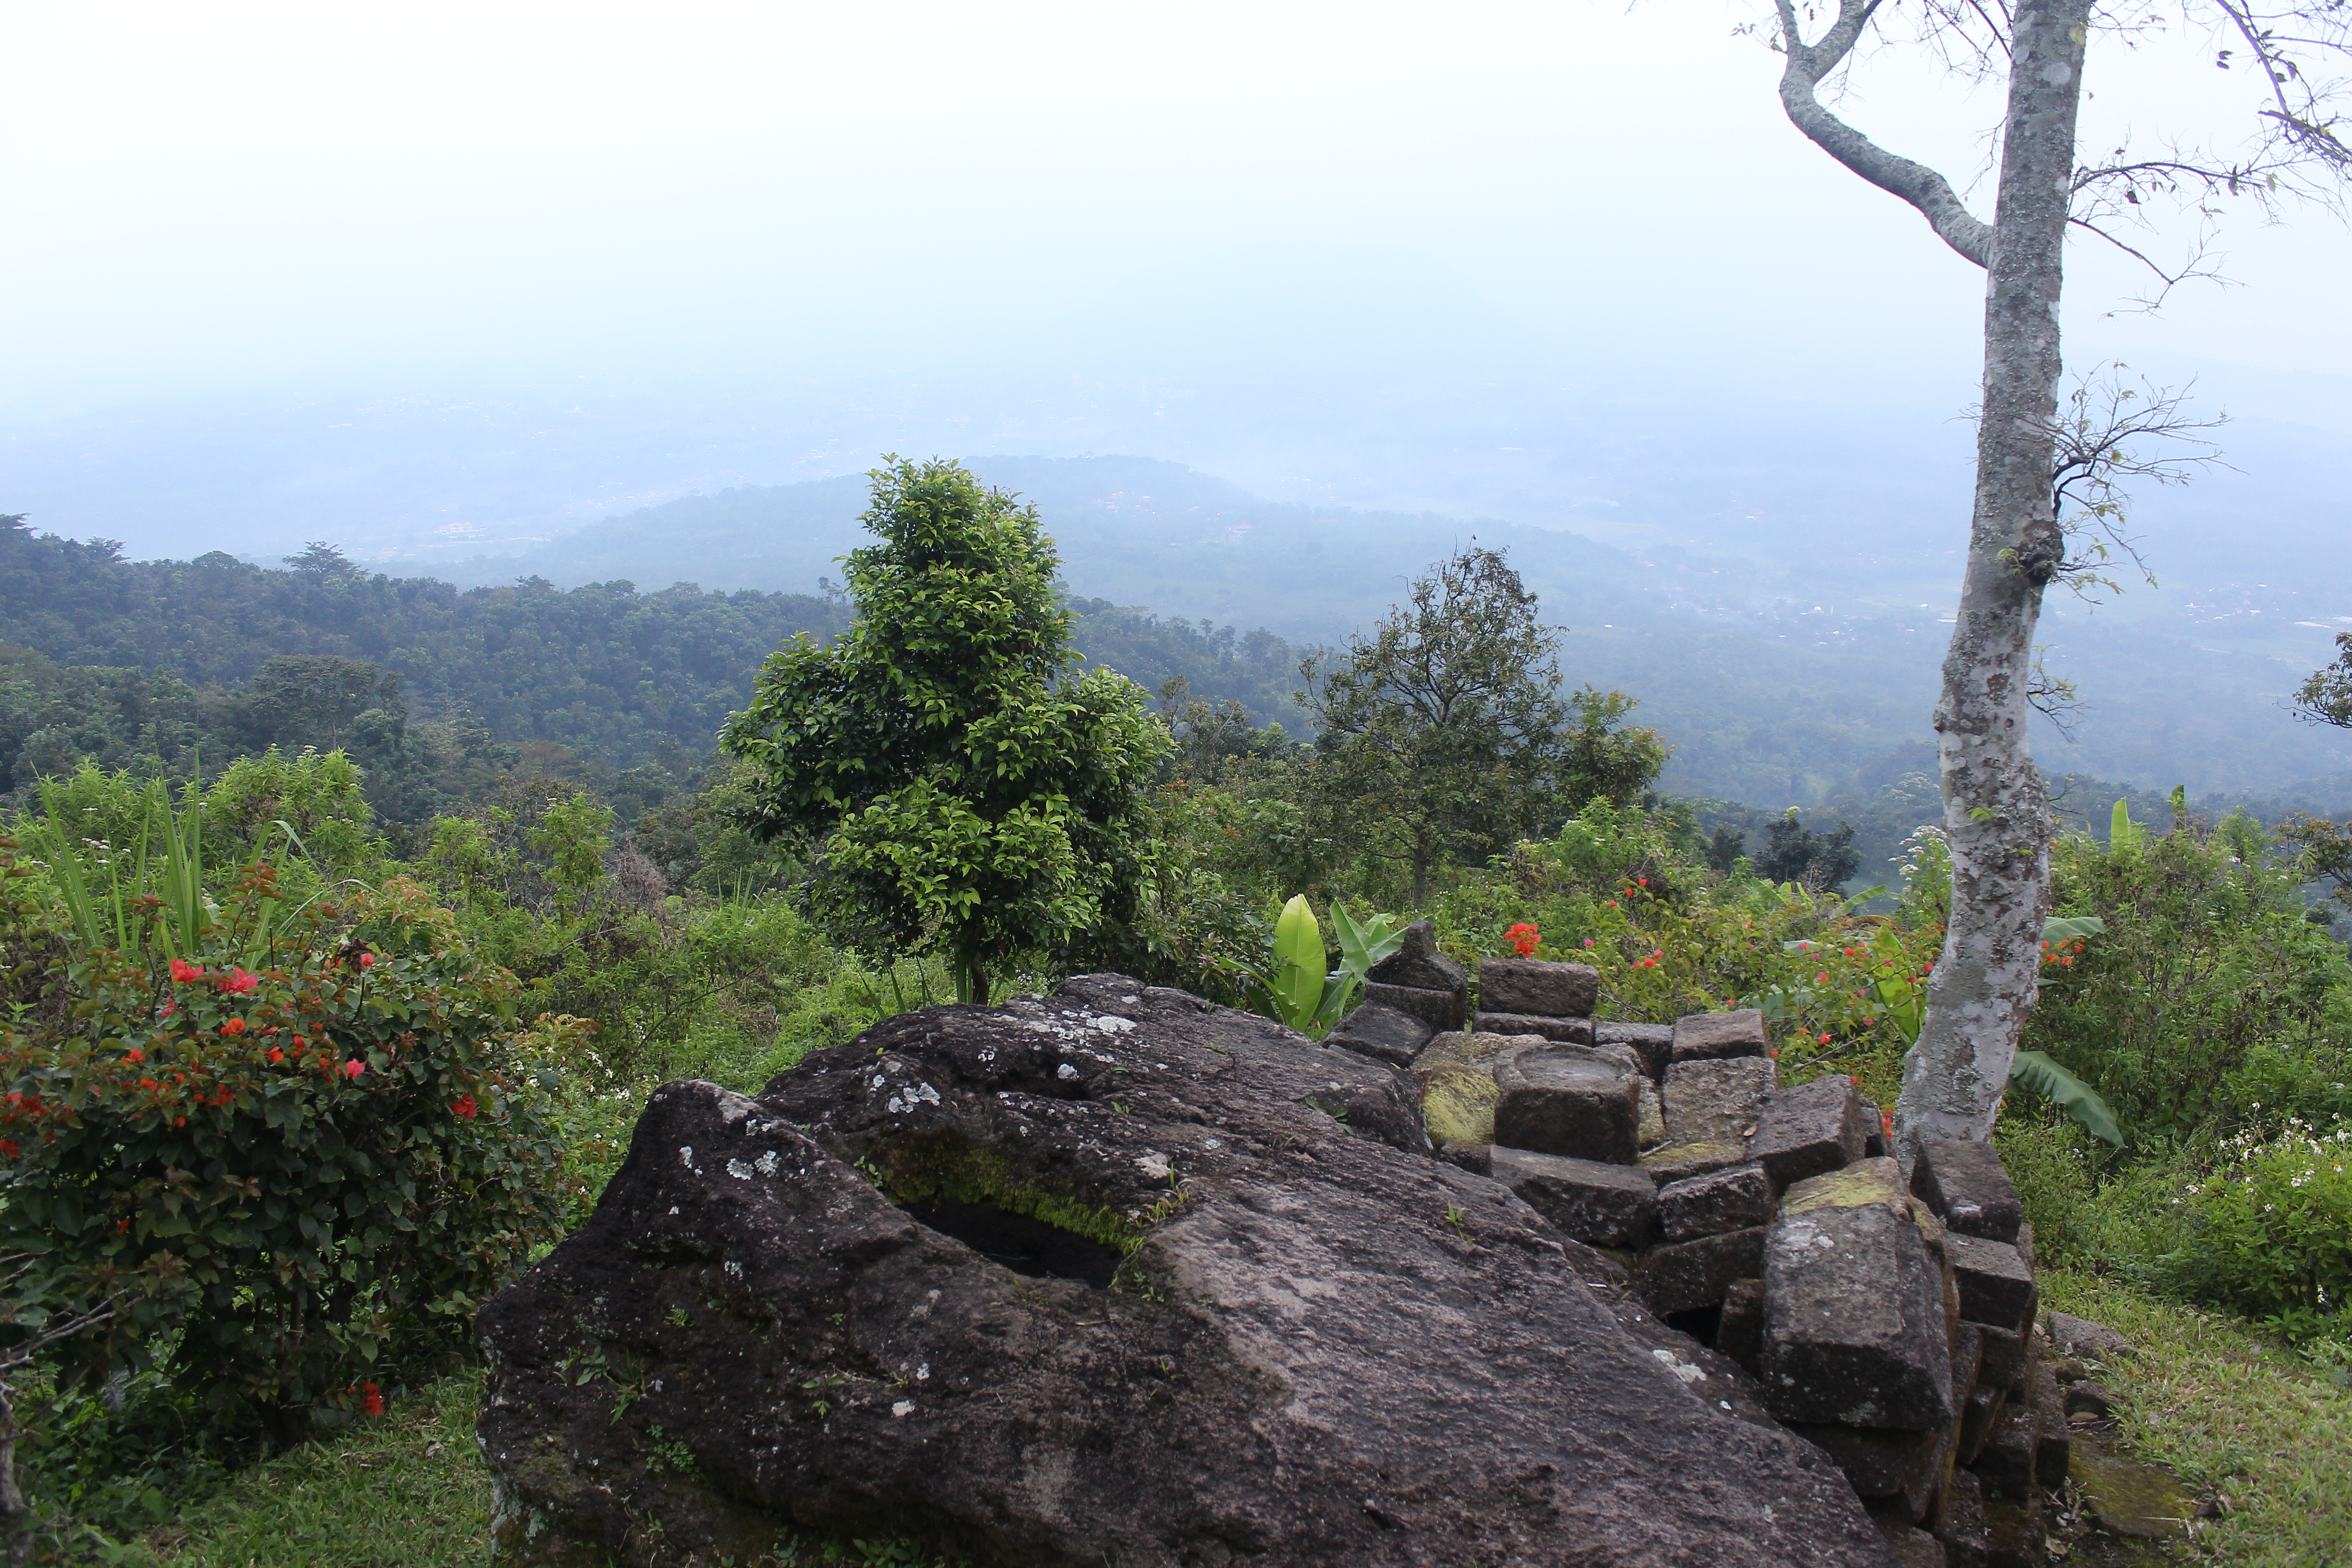 View from a mountaintop over jungle and rock